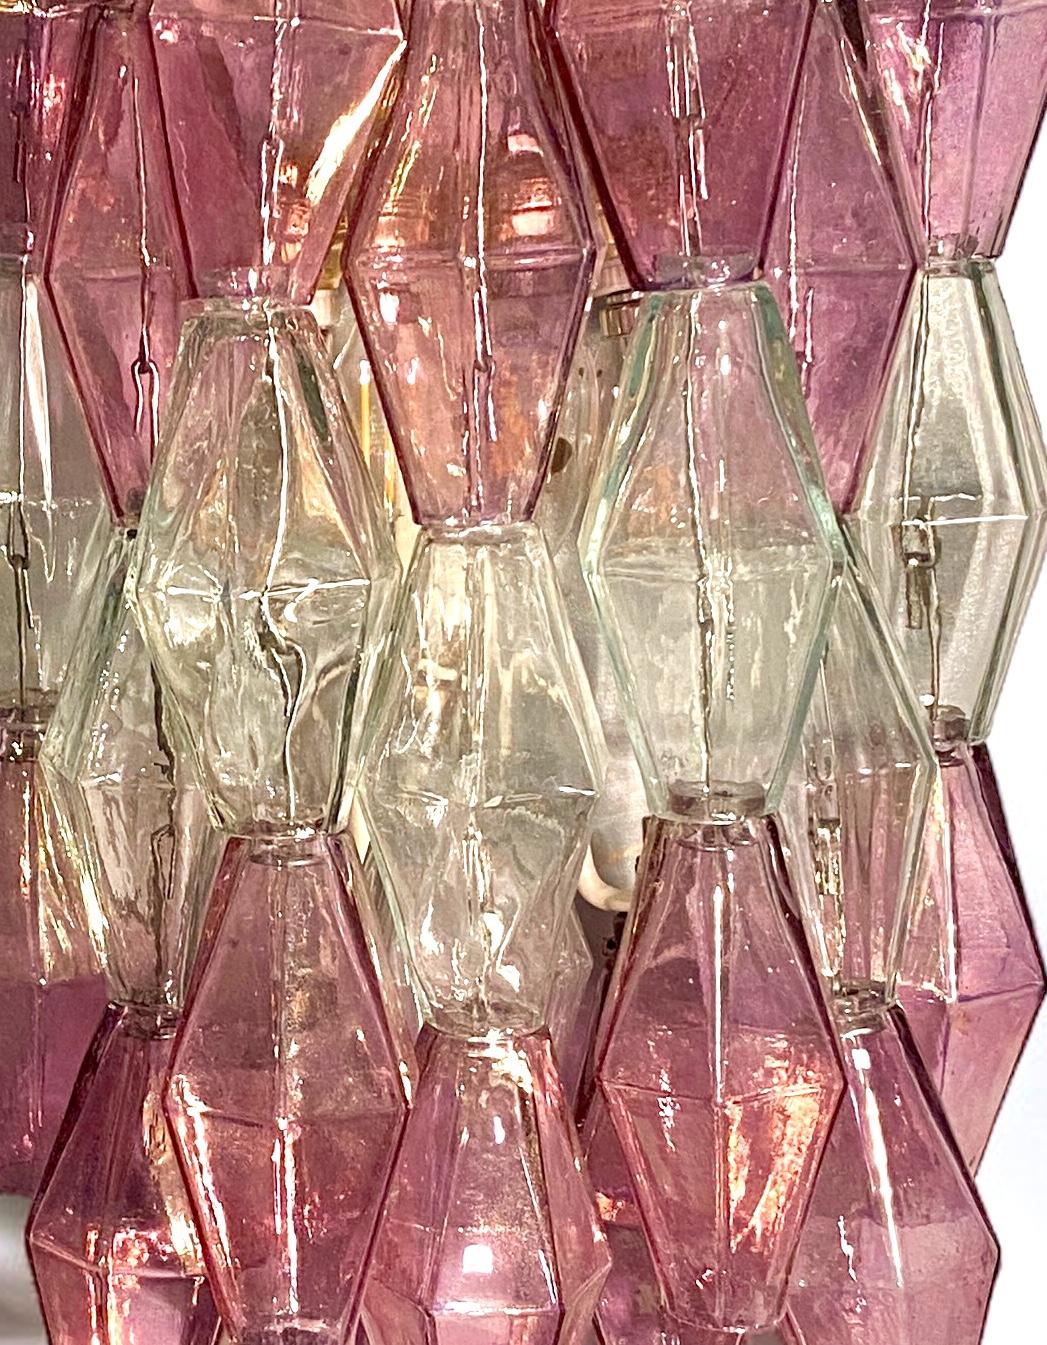 Pair of Pink and Clear Poliedri Sconces Carlo Scarpa Venini Variation, 1980' For Sale 2